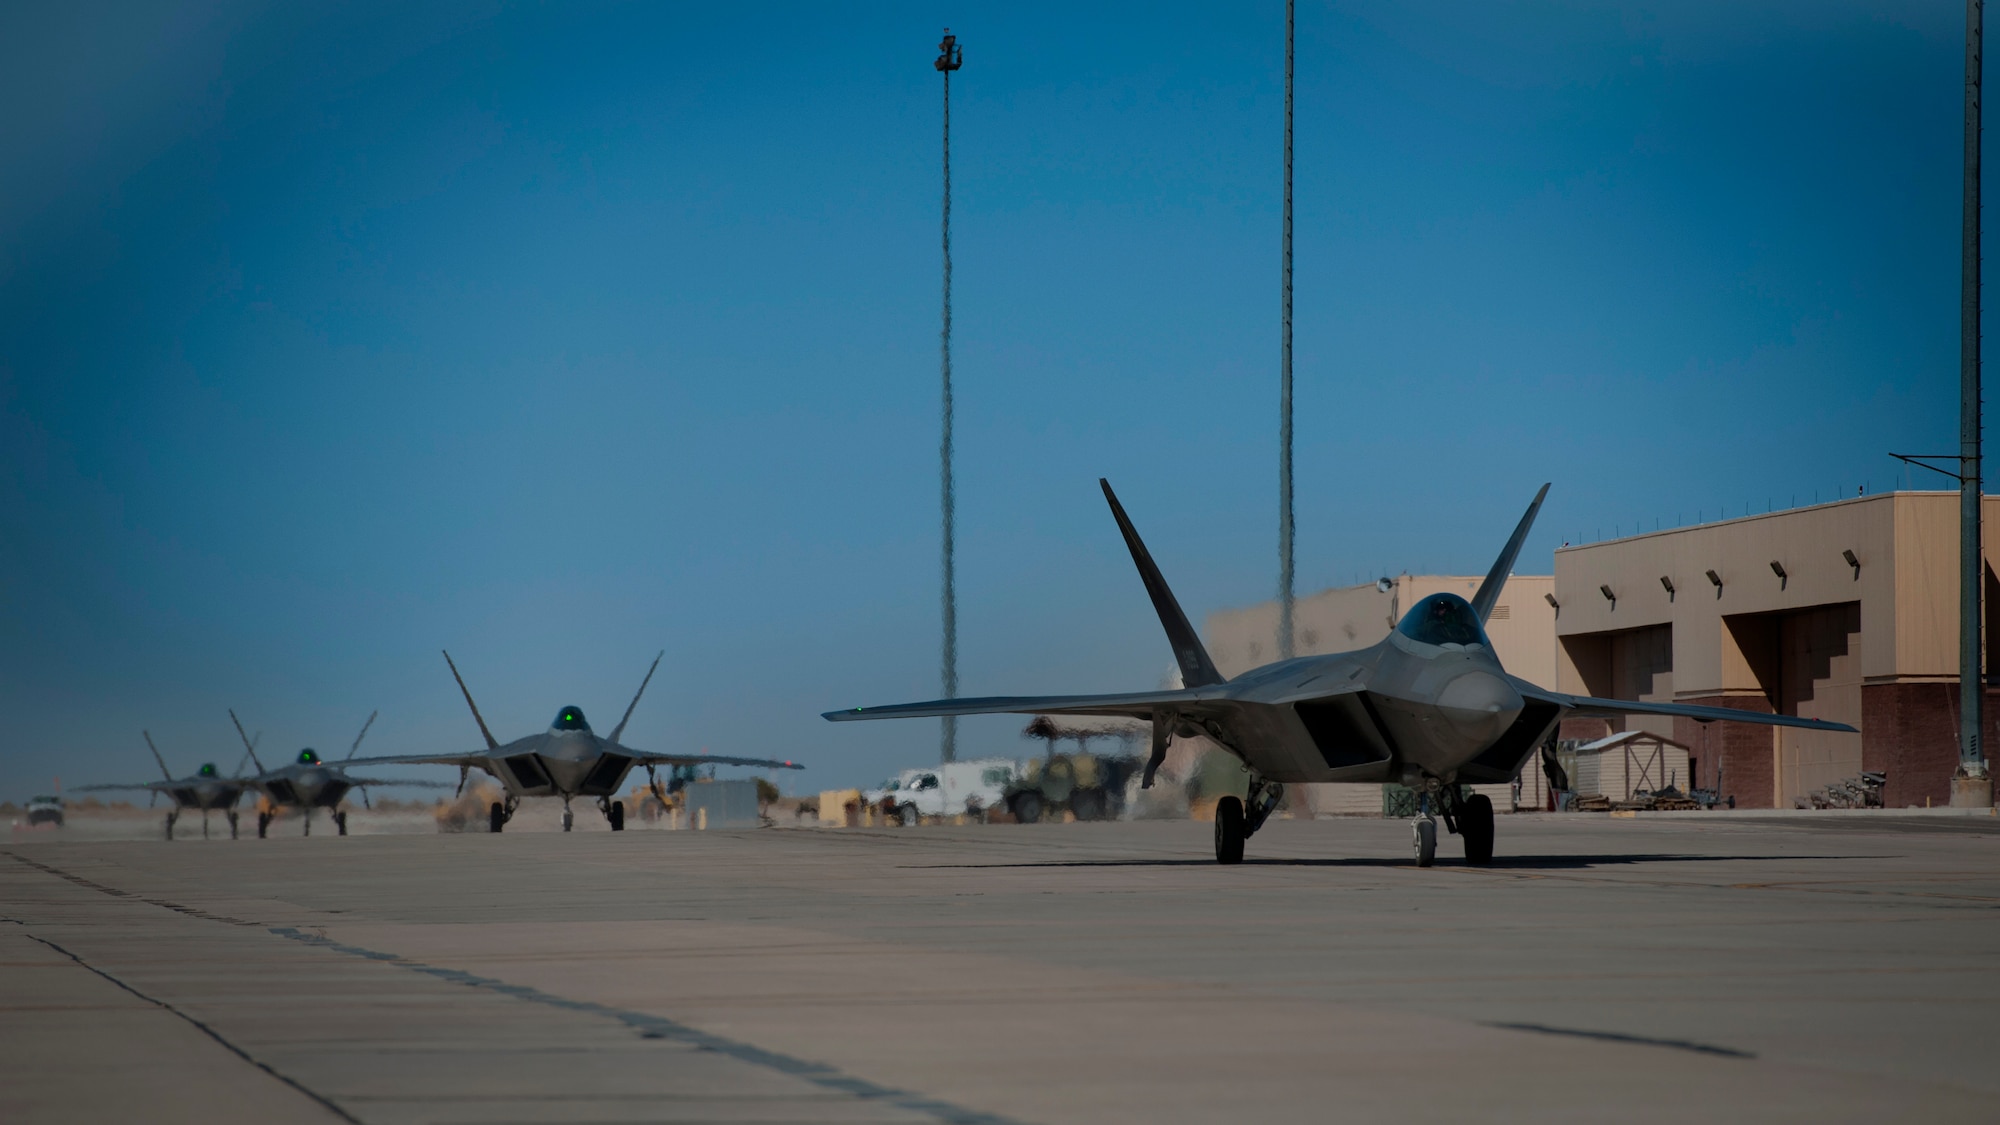 Four F-22 Raptors return from the final four-ship tactical sortie flown at Holloman Air Force Base, N.M., Feb. 20. The 7th Fighter Squadron and members of the Holloman community celebrated this sortie before the F-22s depart for Tyndall Air Force Base, Fla., in early April. (U.S. Air Force photo by Airman 1st Class Aaron Montoya / Released)